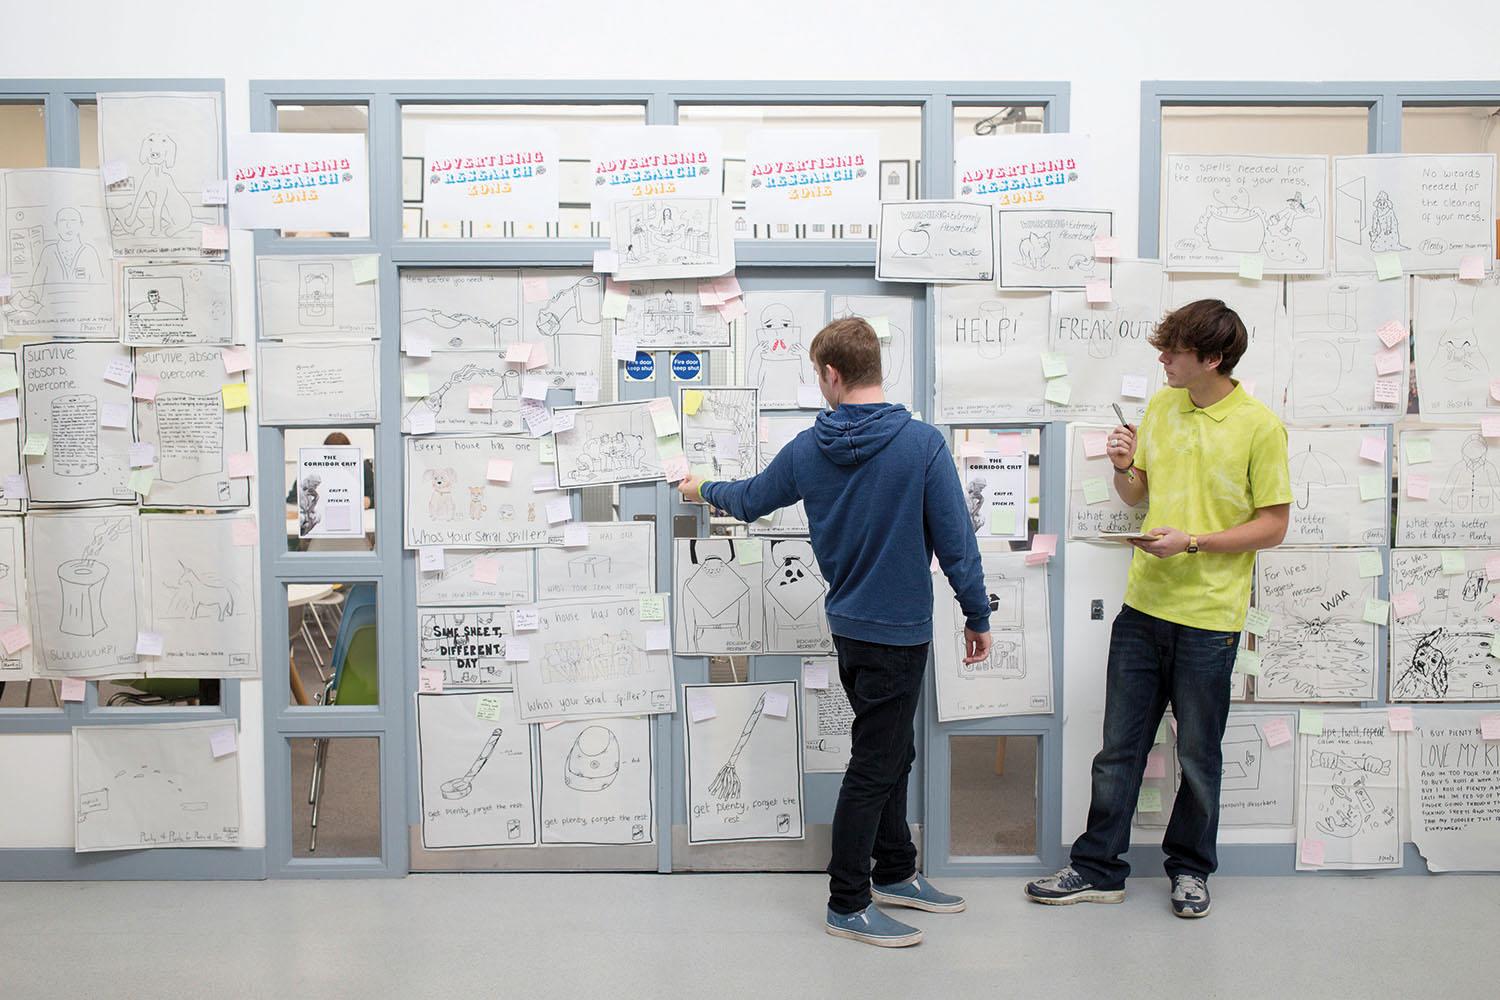 Students standing at a wall full of ideas written on paper